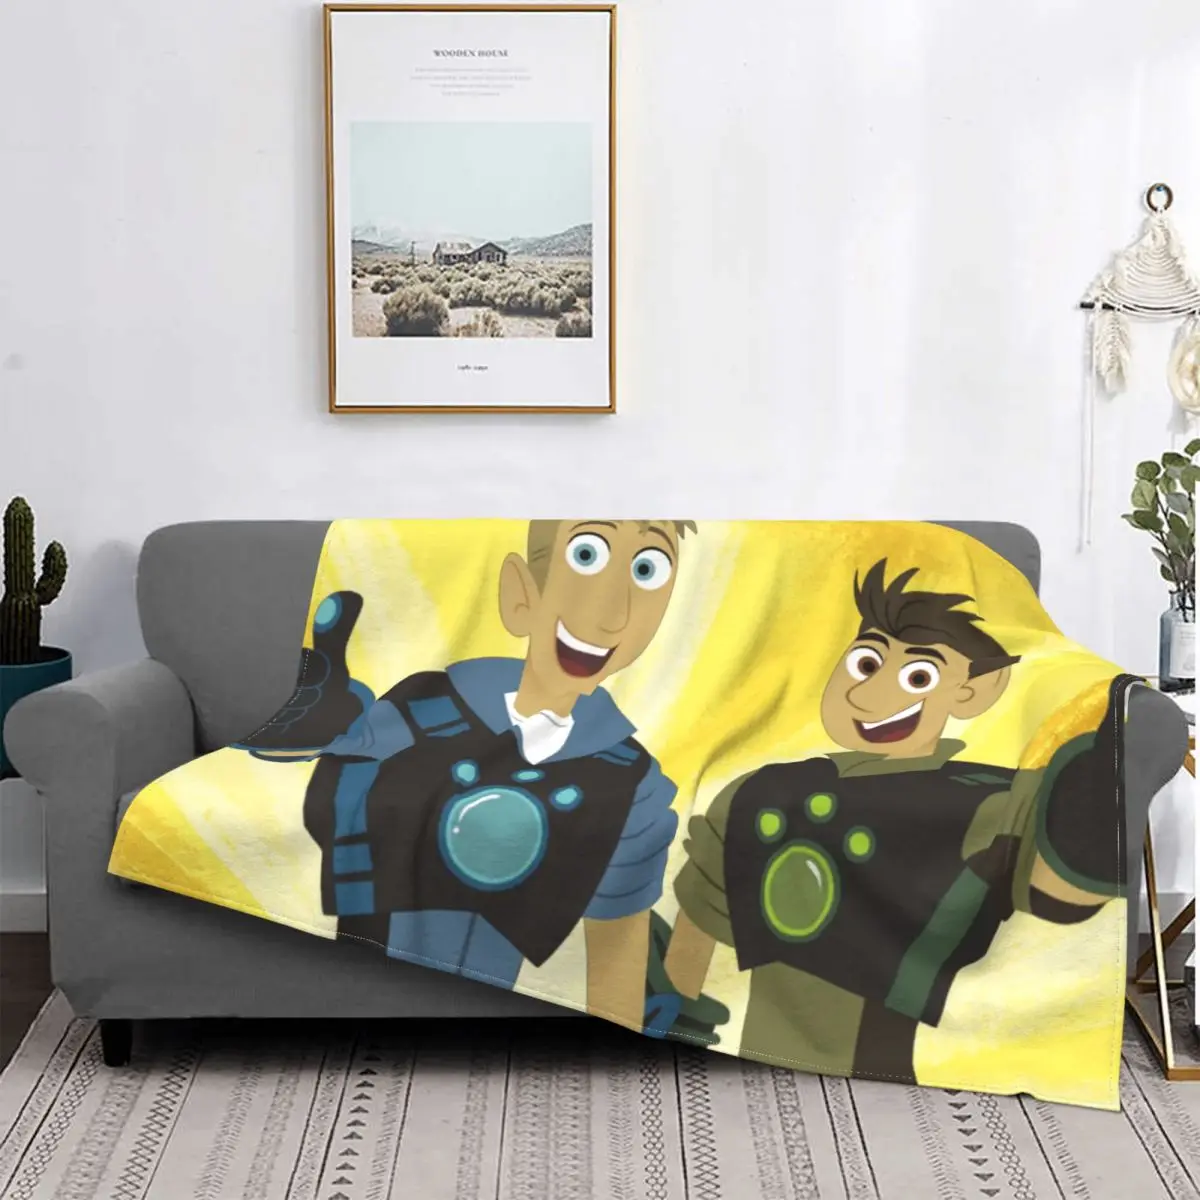 

Wild Kratts Thumbs Up Blankets Fleece Printed Educational Animation Portable Soft Throw Blanket for Sofa Bedroom Quilt